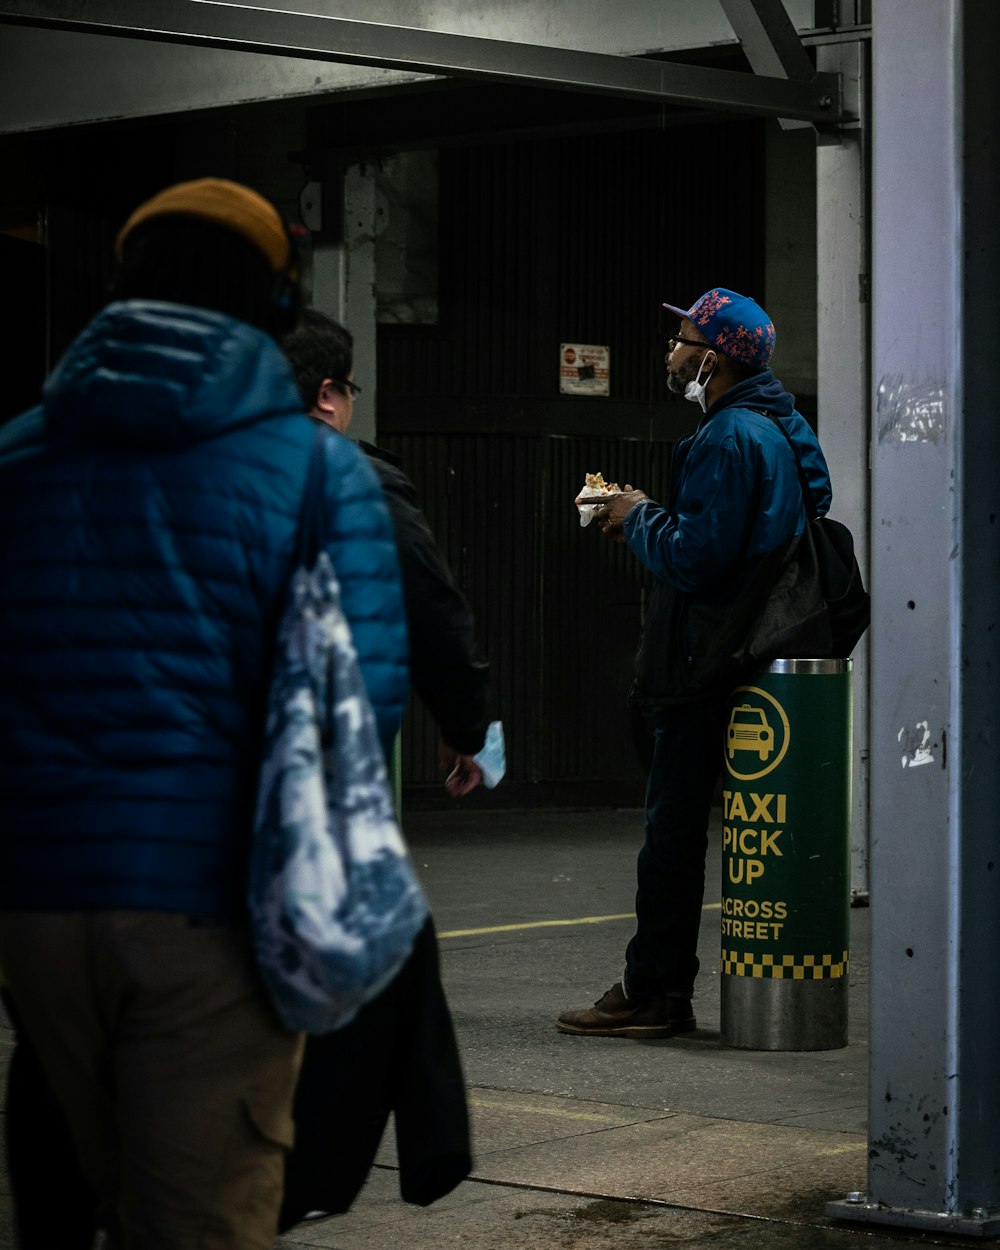 a man in a blue jacket is eating a piece of food